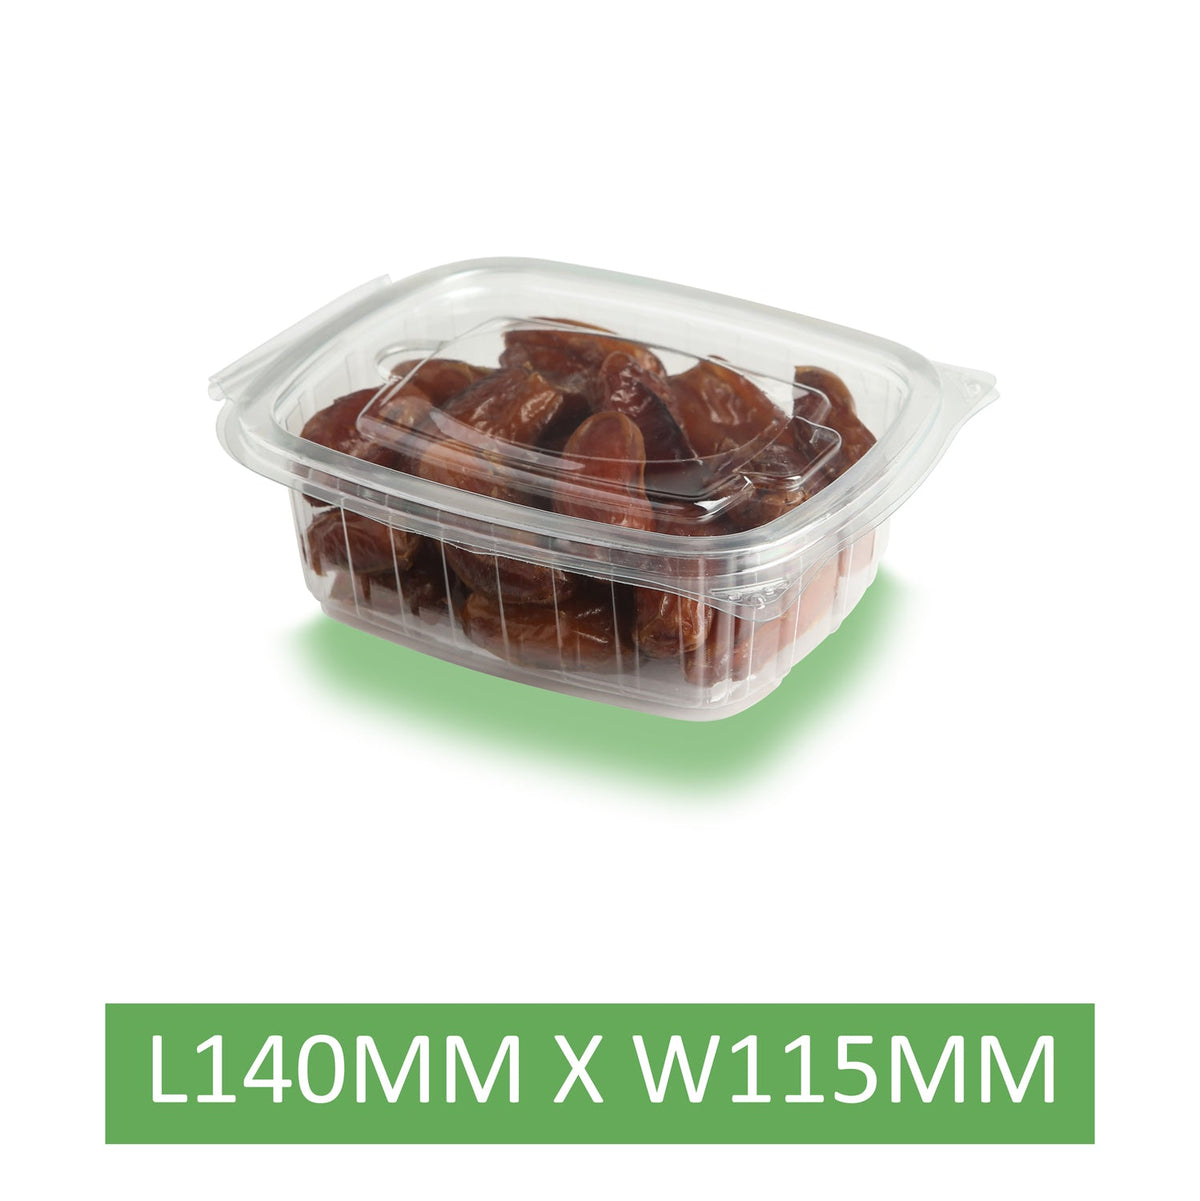 500 x 375cc Clear Cold Food/Salad/Cake Container With Hinged Lid - BULK - Recyclable rpet